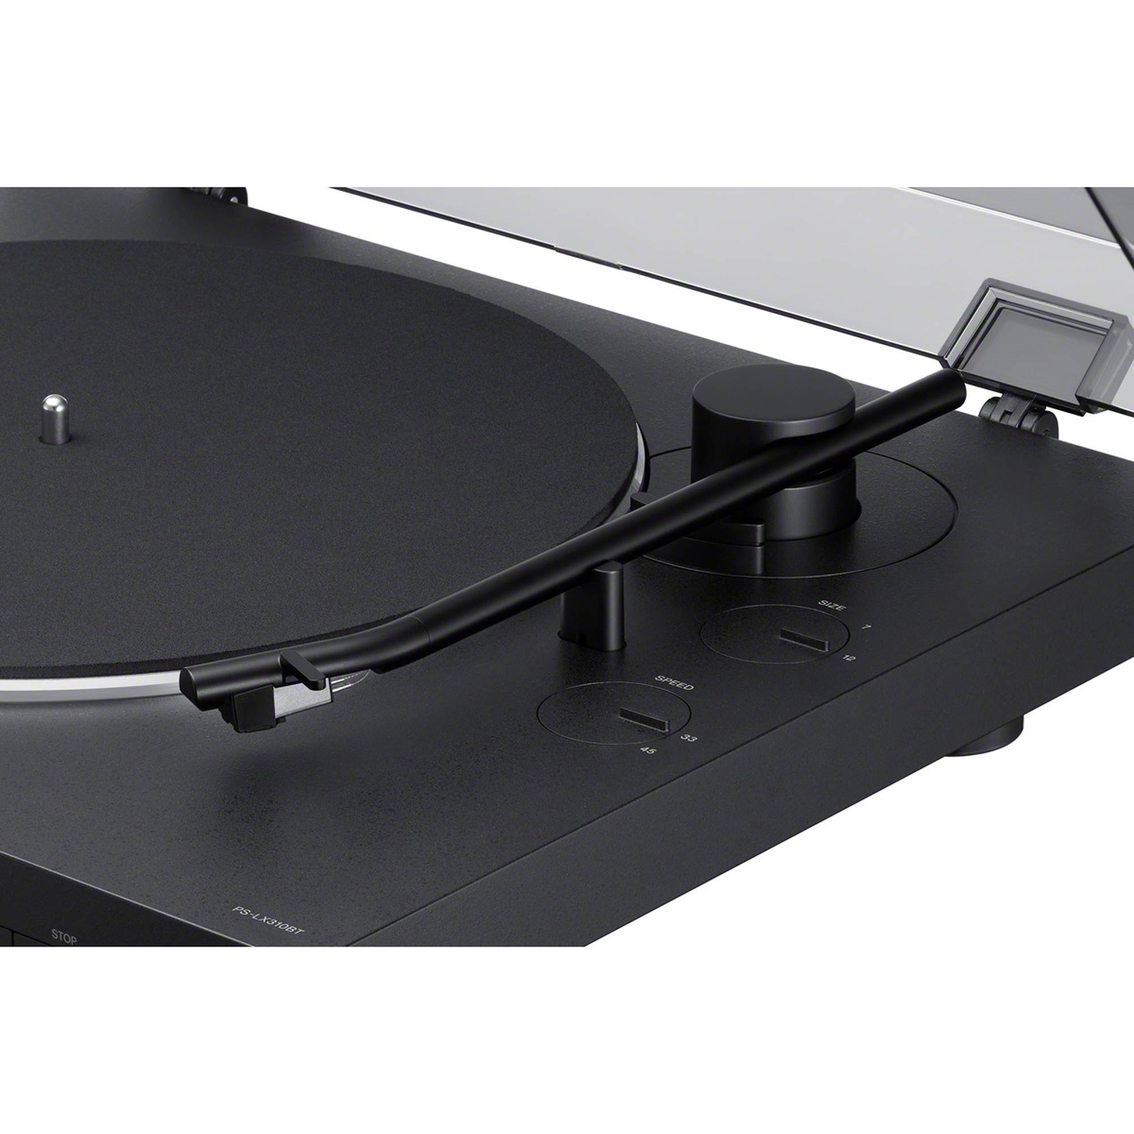 Sony Wireless Bluetooth Turntable - Image 8 of 8